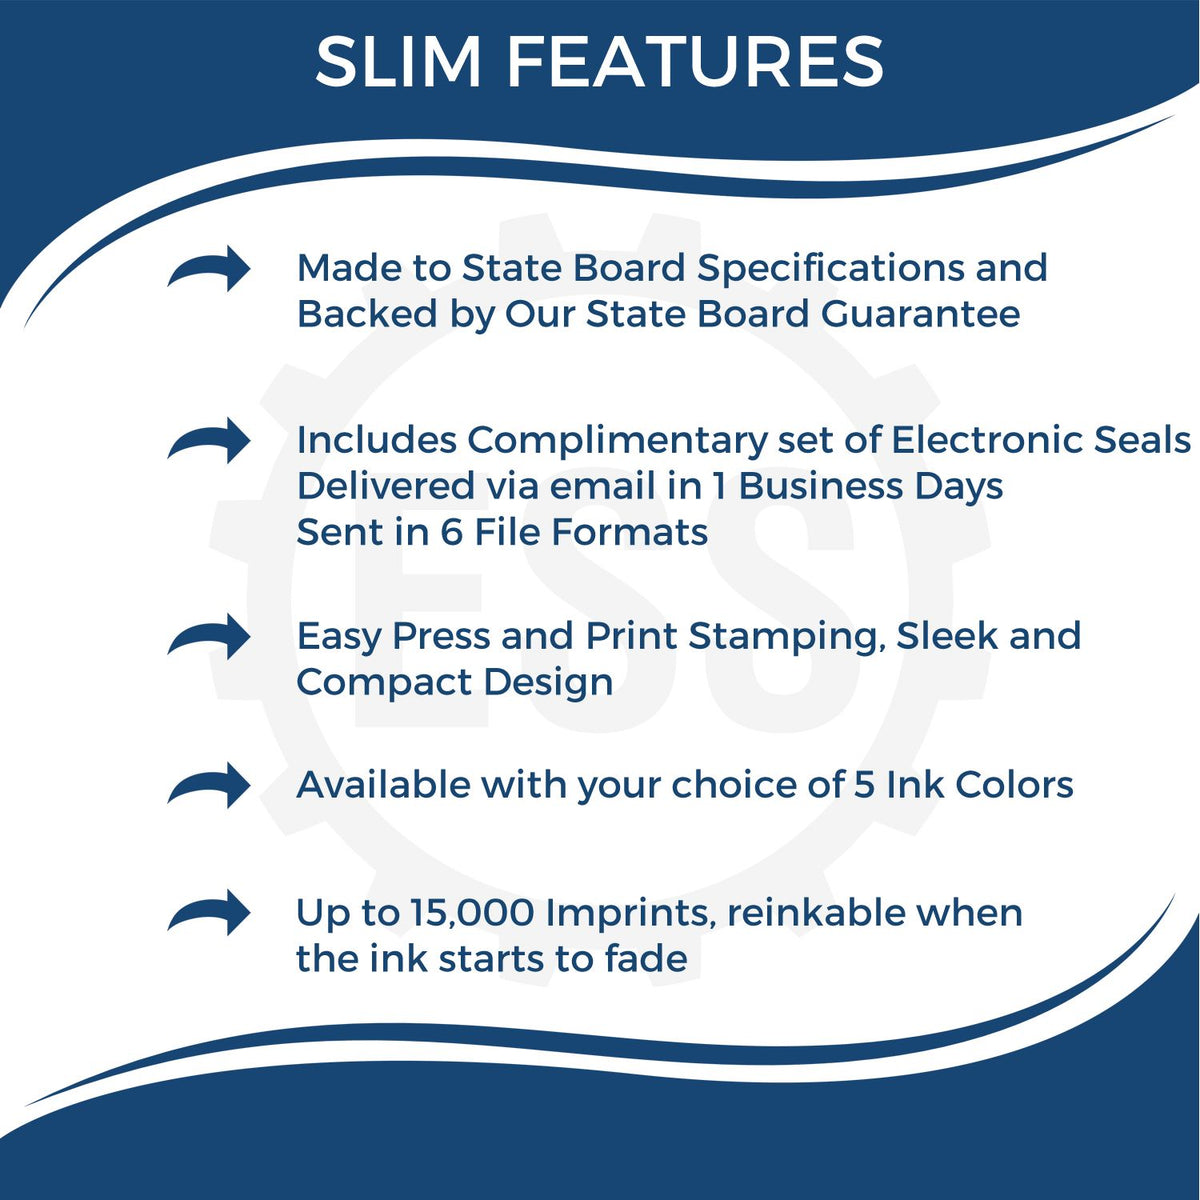 A picture of an infographic highlighting the selling points for the Super Slim California Notary Public Stamp